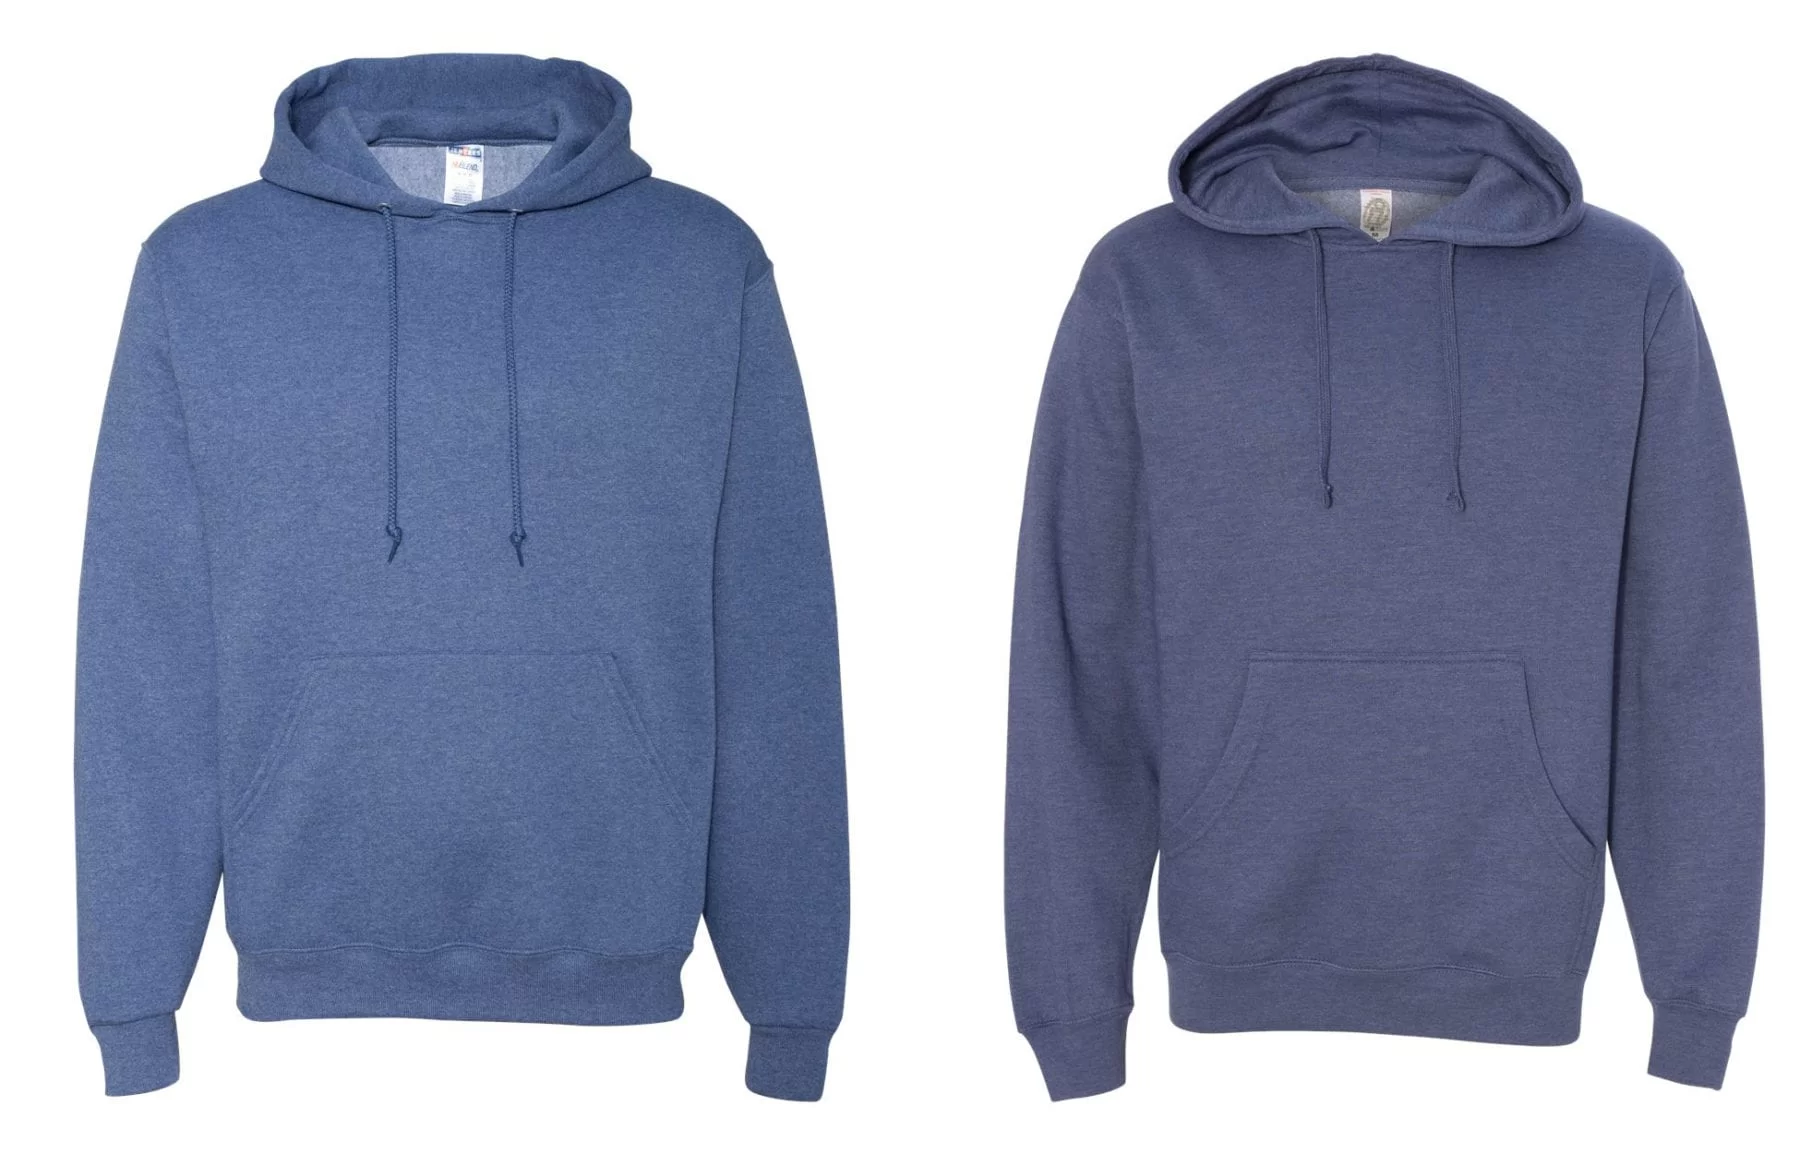 The Best Colors for Hoodies and How to Clean Them